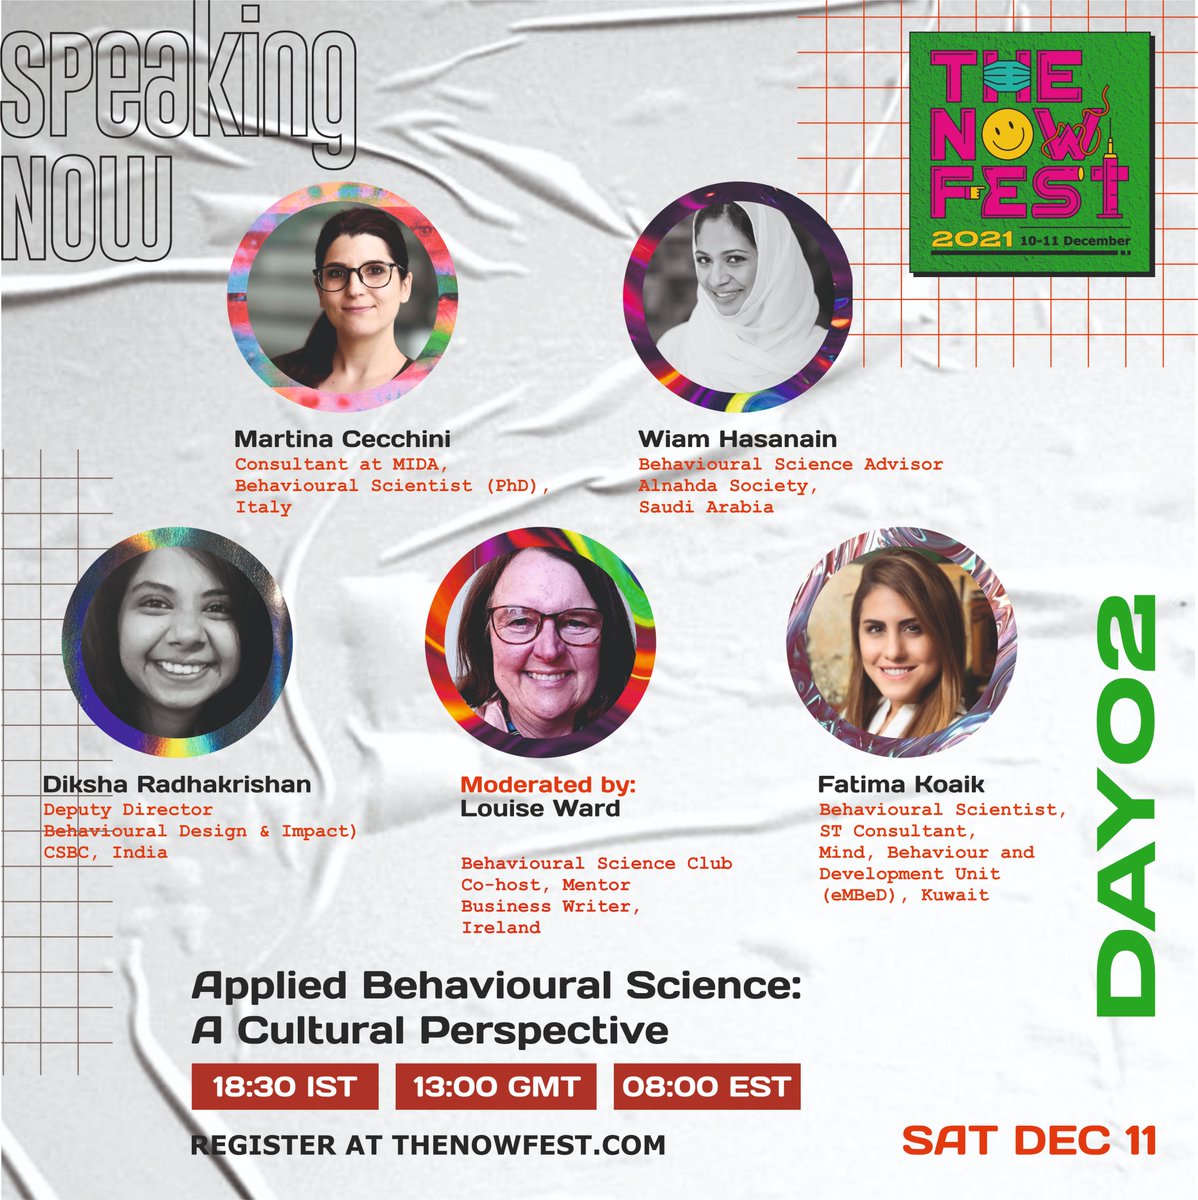 #NowFest, yay! See you there on the 10th and 11th Dec. Register at: thenowfest.com @TheNowFest with @Nudgestocker @Diksha_RK @FatimaKeaik and Wiam Hasanain #behavioralscience #behavioralchange #behavioraldesign